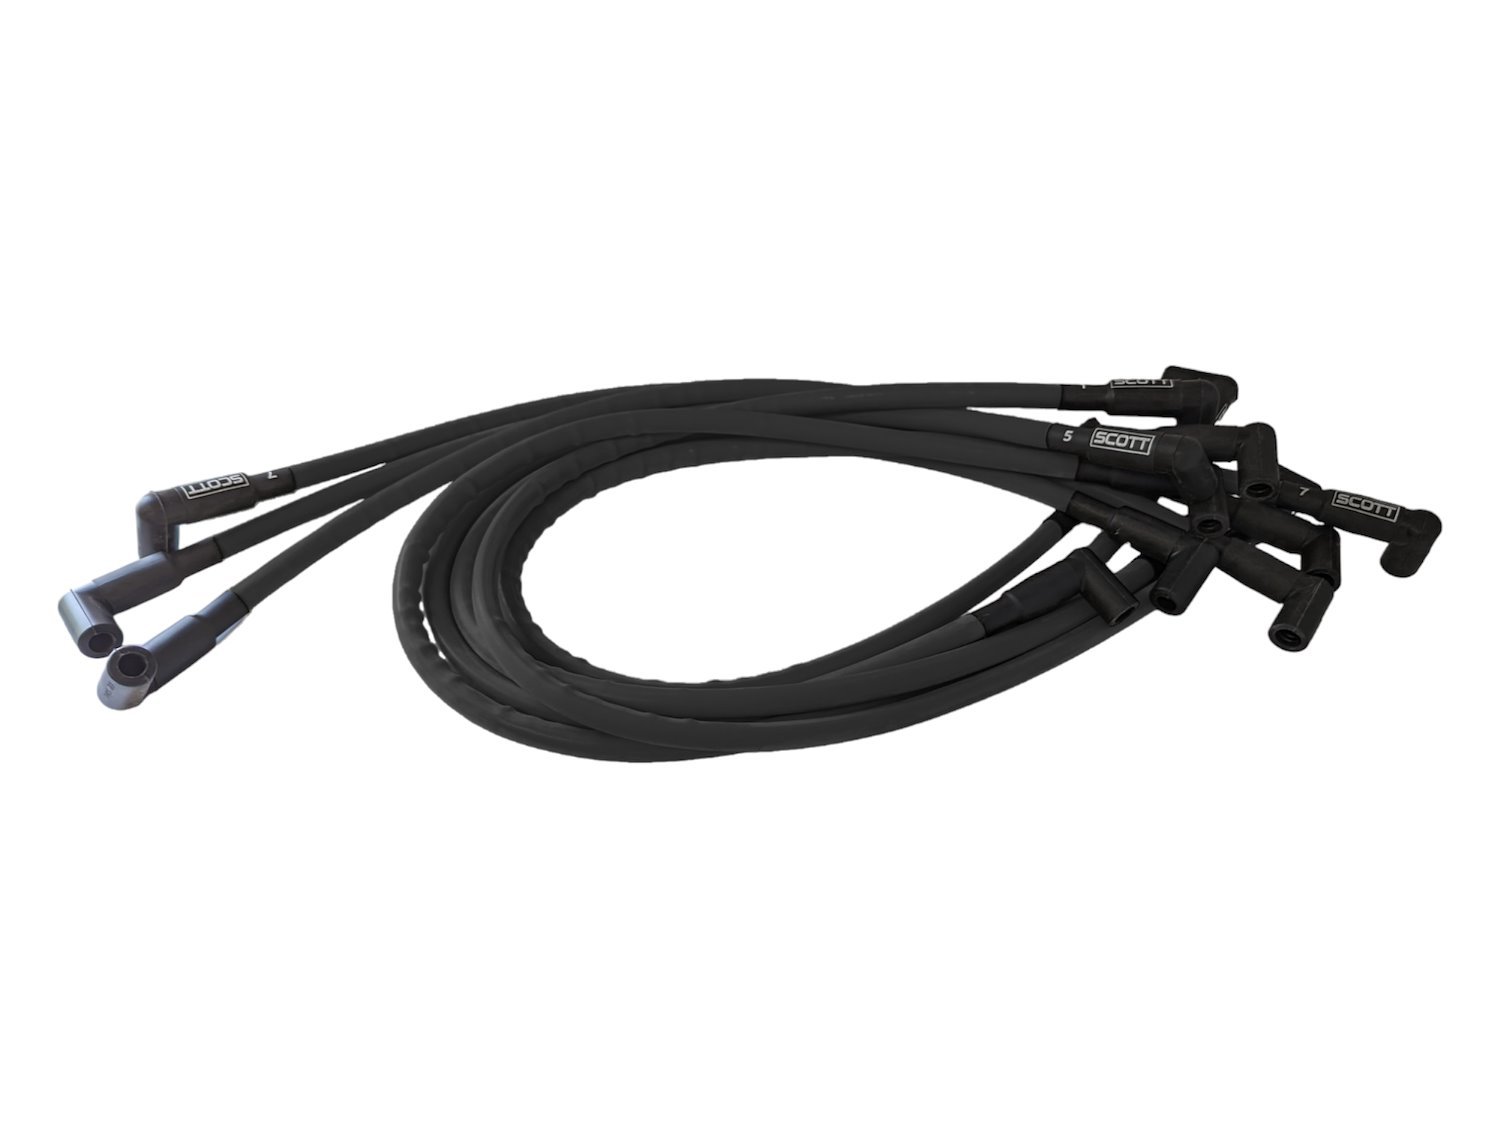 SPW-CH-435-1 High-Performance Silicone-Sleeved Spark Plug Wire Set for Small Block Chevy, Around Front [Black]